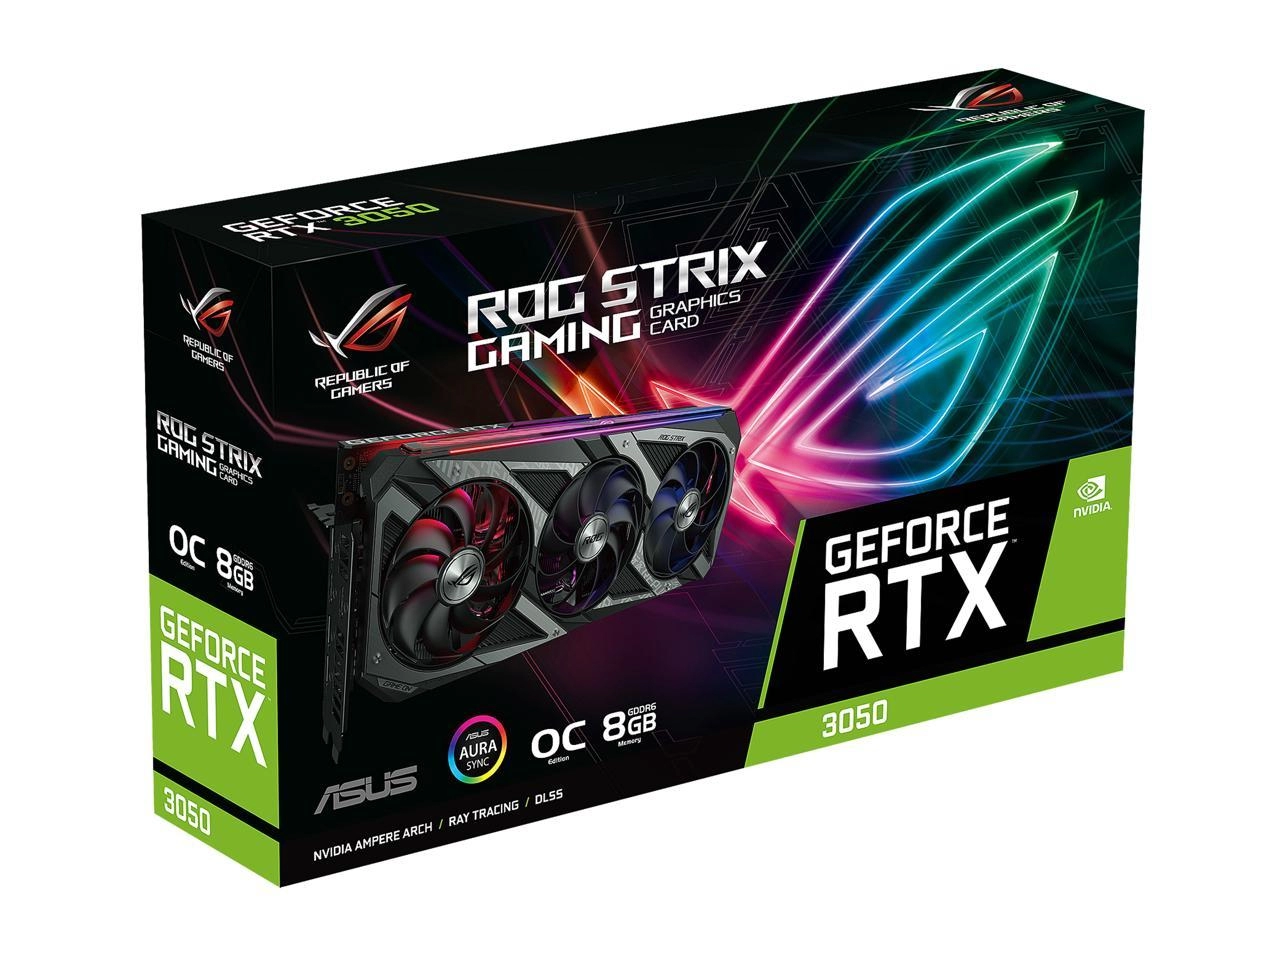 ASUS ROG Strix GeForce RTX 3050 OC Edition 8GB Package Content